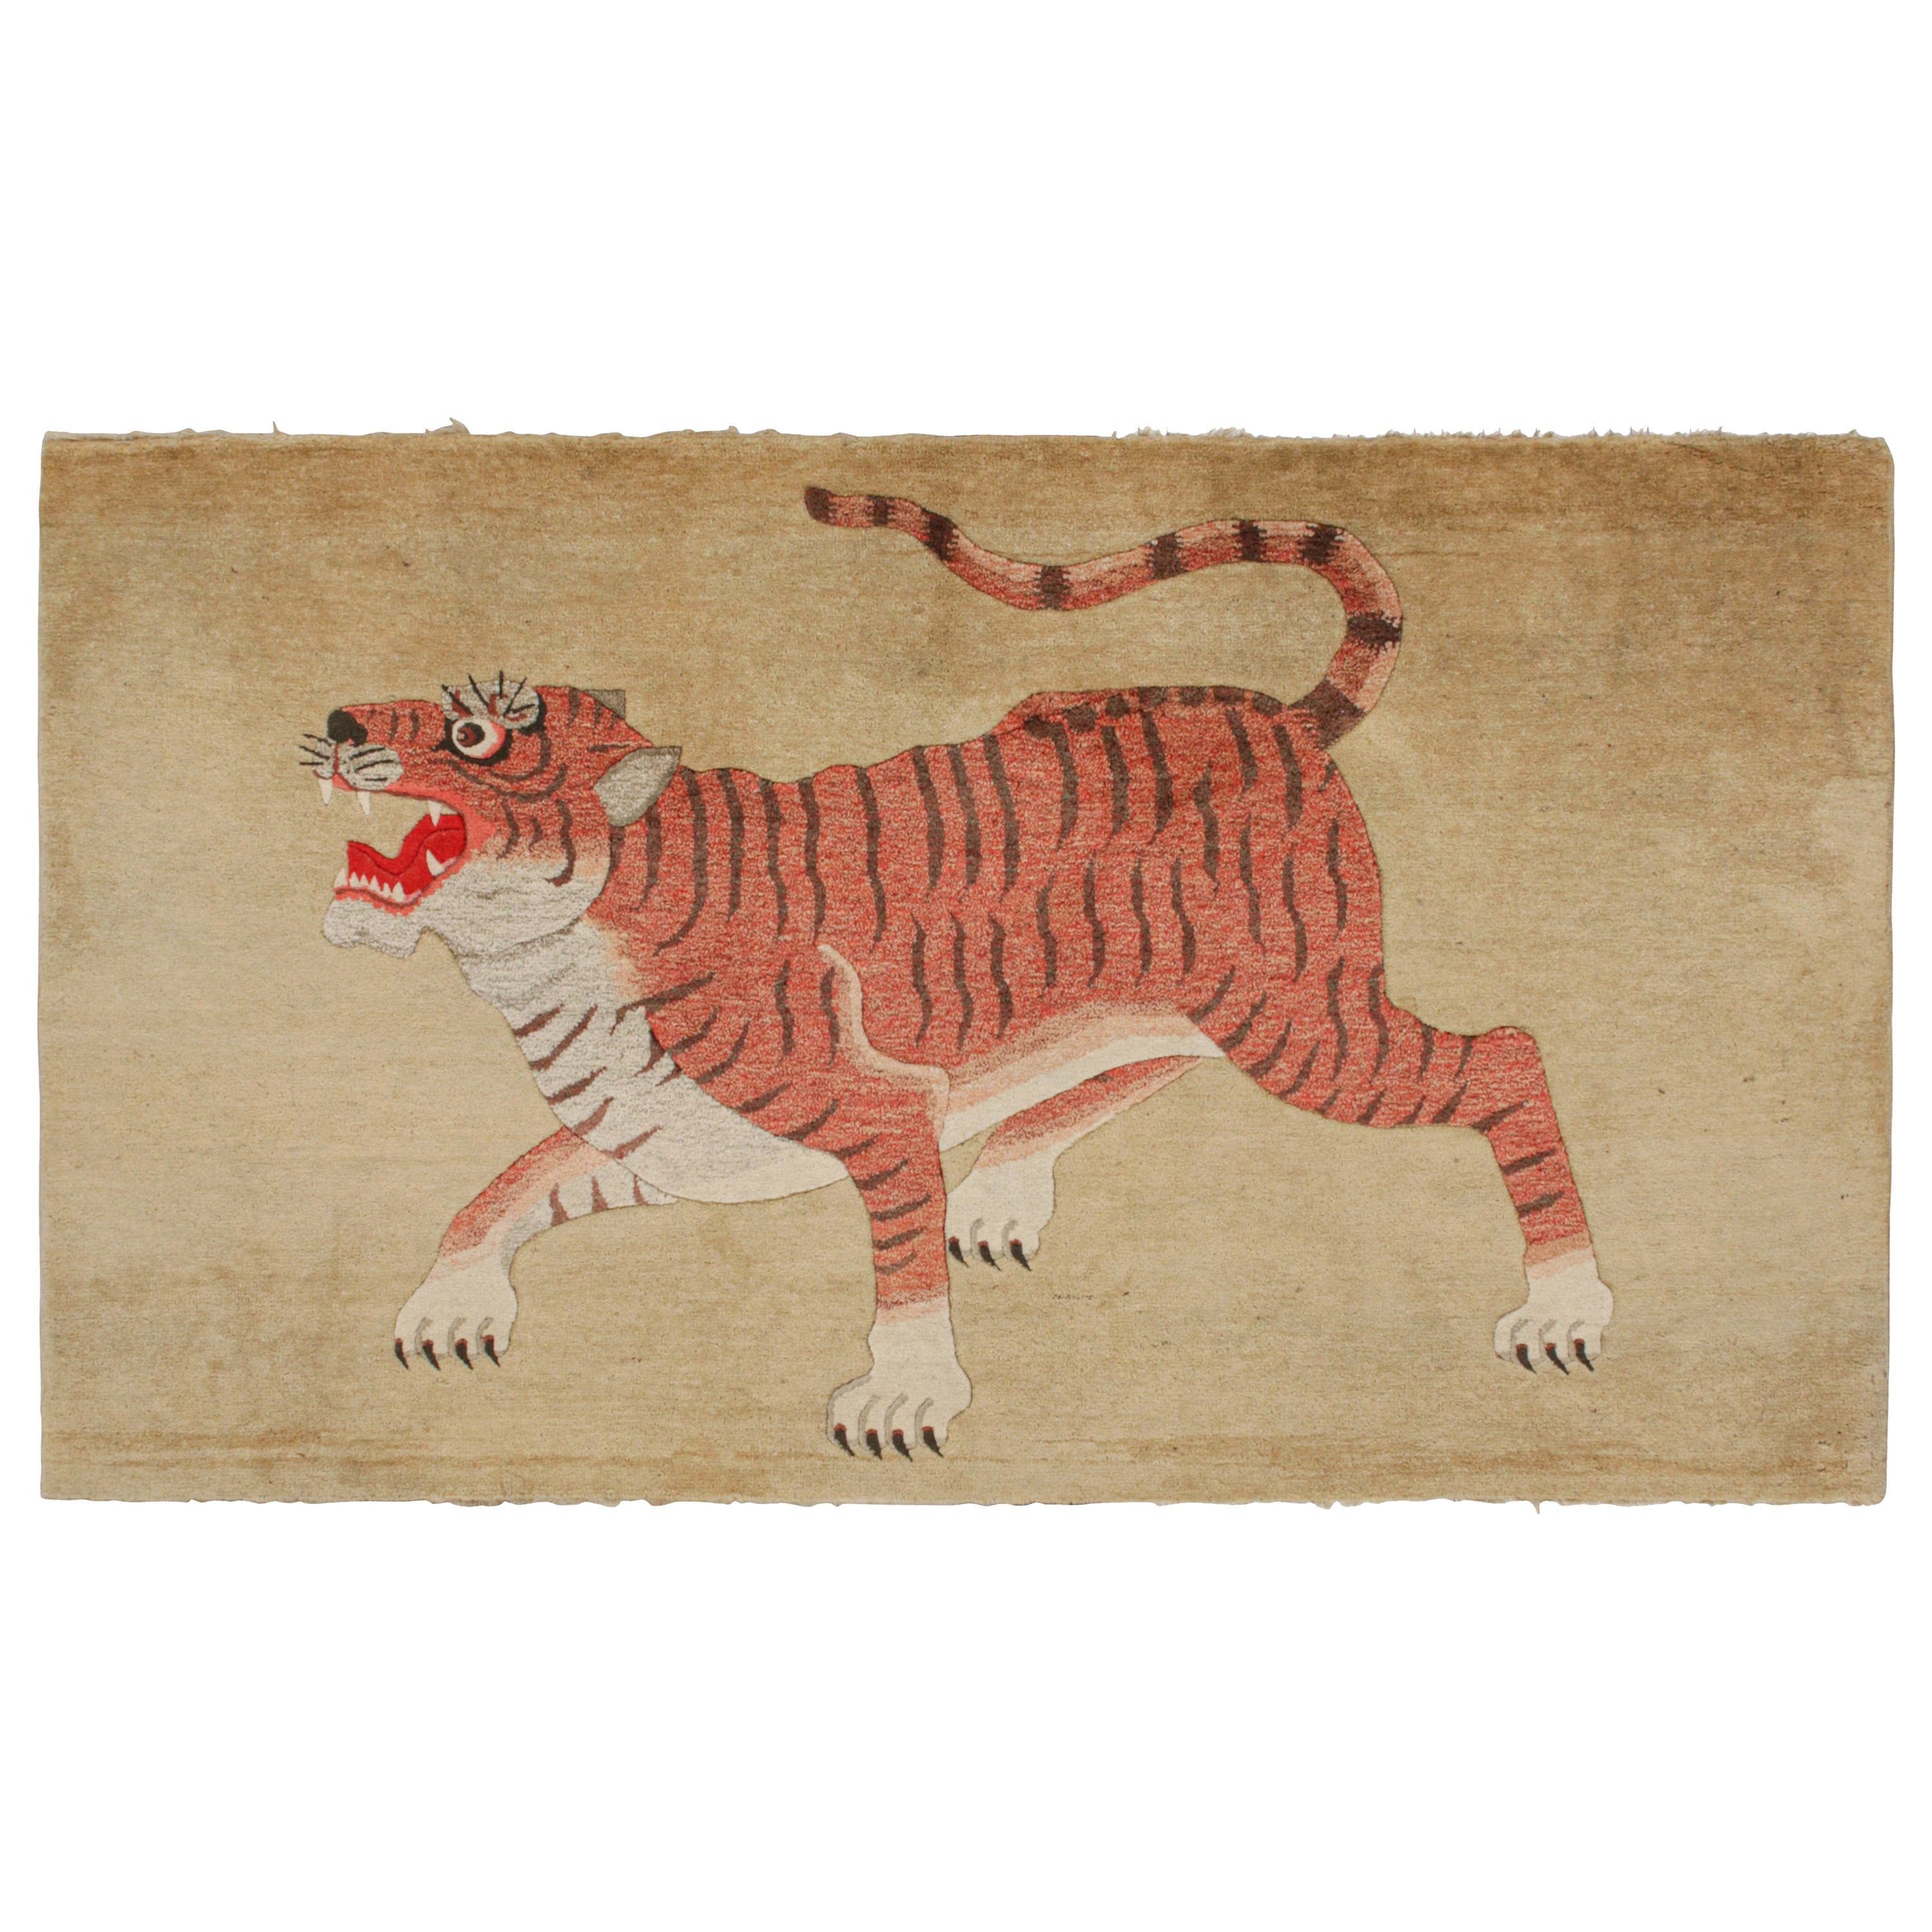 Antique Tiger Runner Rug in Beige-Brown with Red Pictorial, from Rug & Kilim For Sale